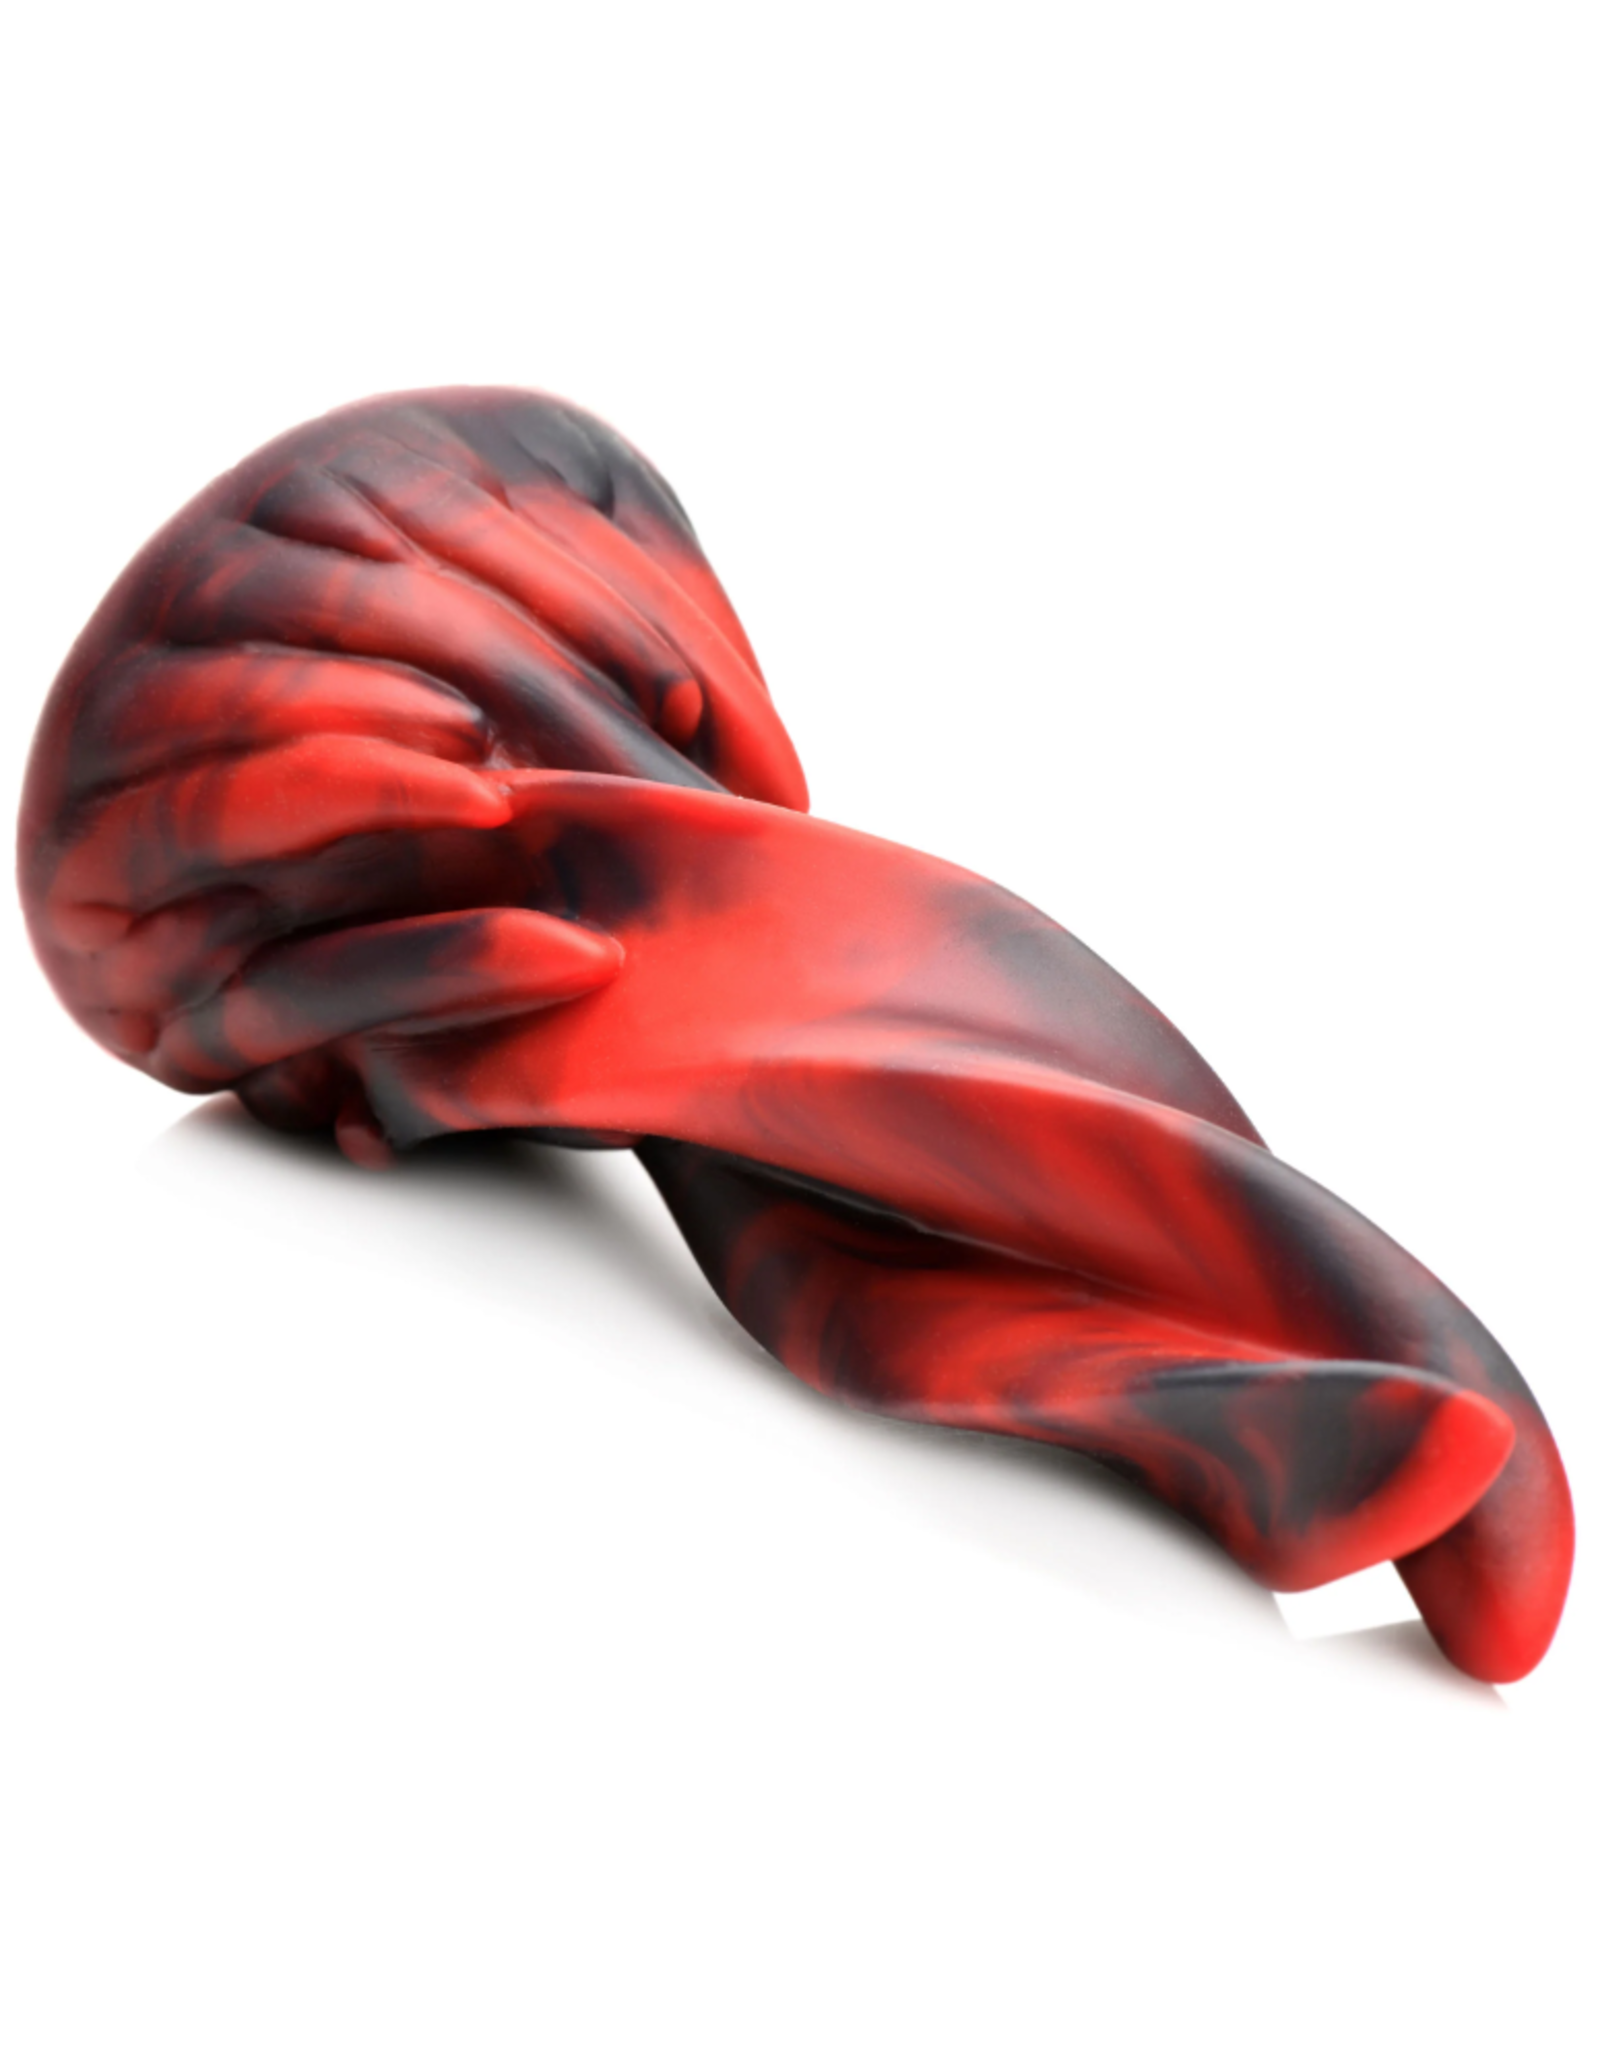 XR Brands Creature Cocks - Hell Kiss Twisted Tongues Silicone Dildo